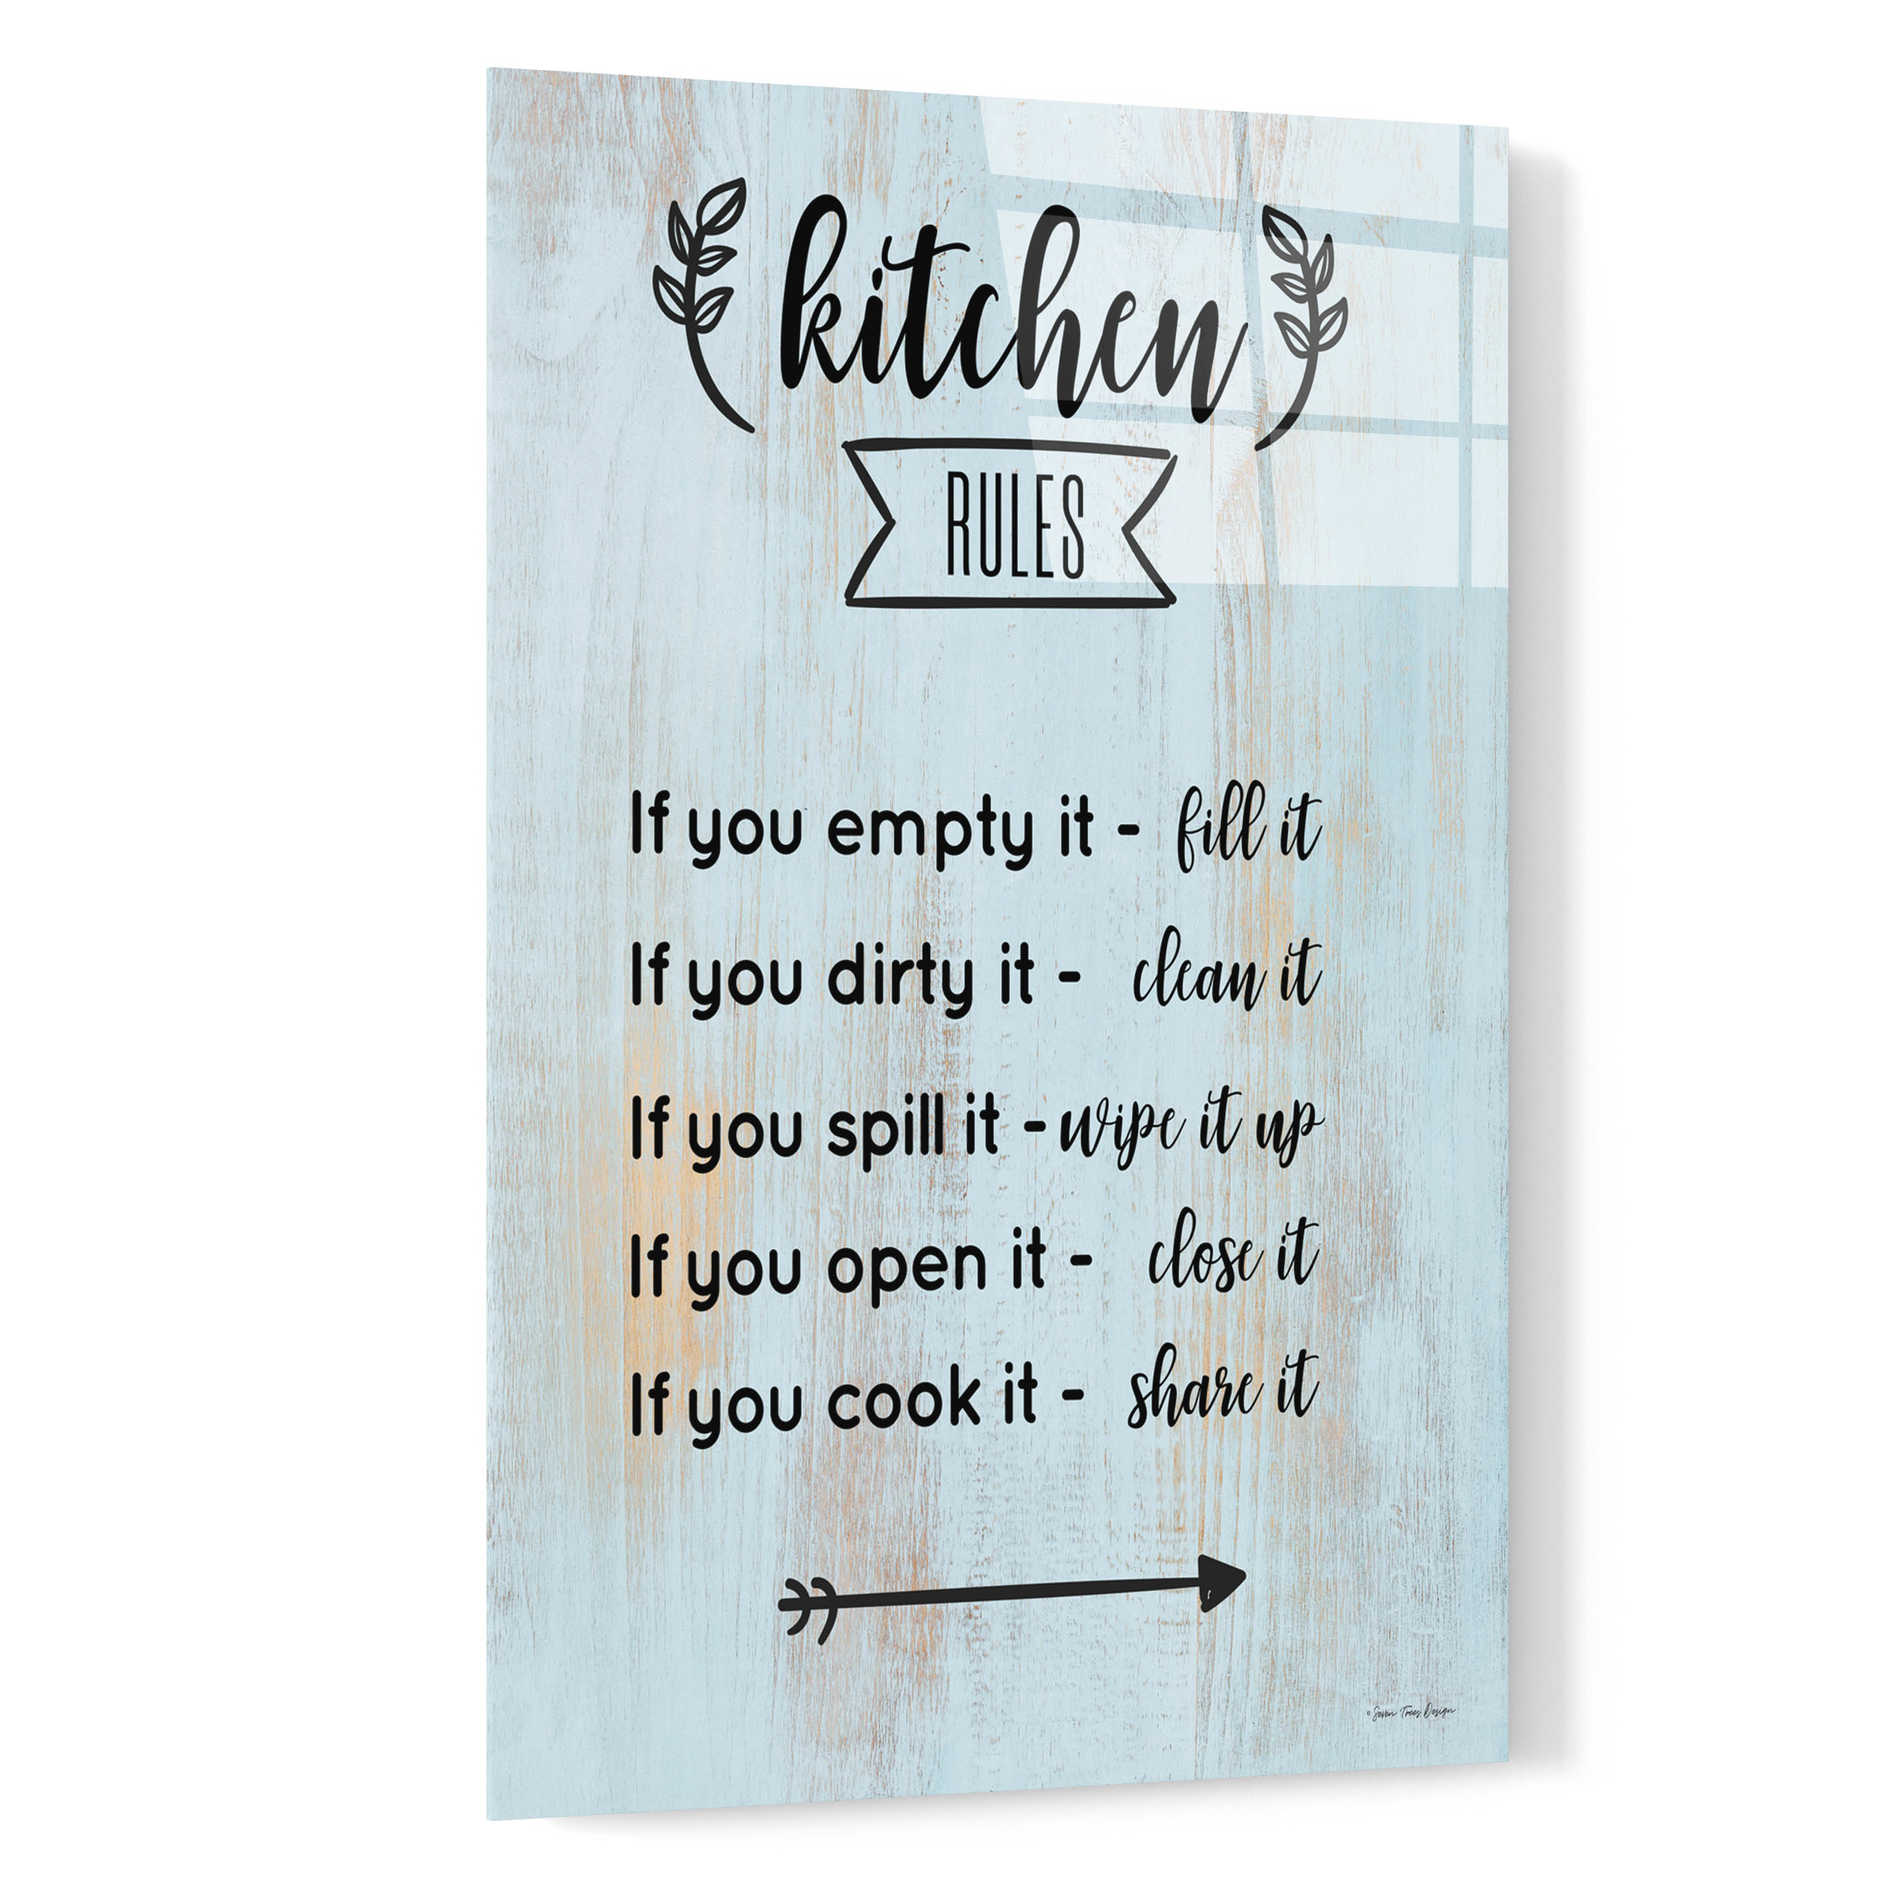 Epic Art 'Kitchen Rules' by Seven Trees Design, Acrylic Glass Wall Art,16x24